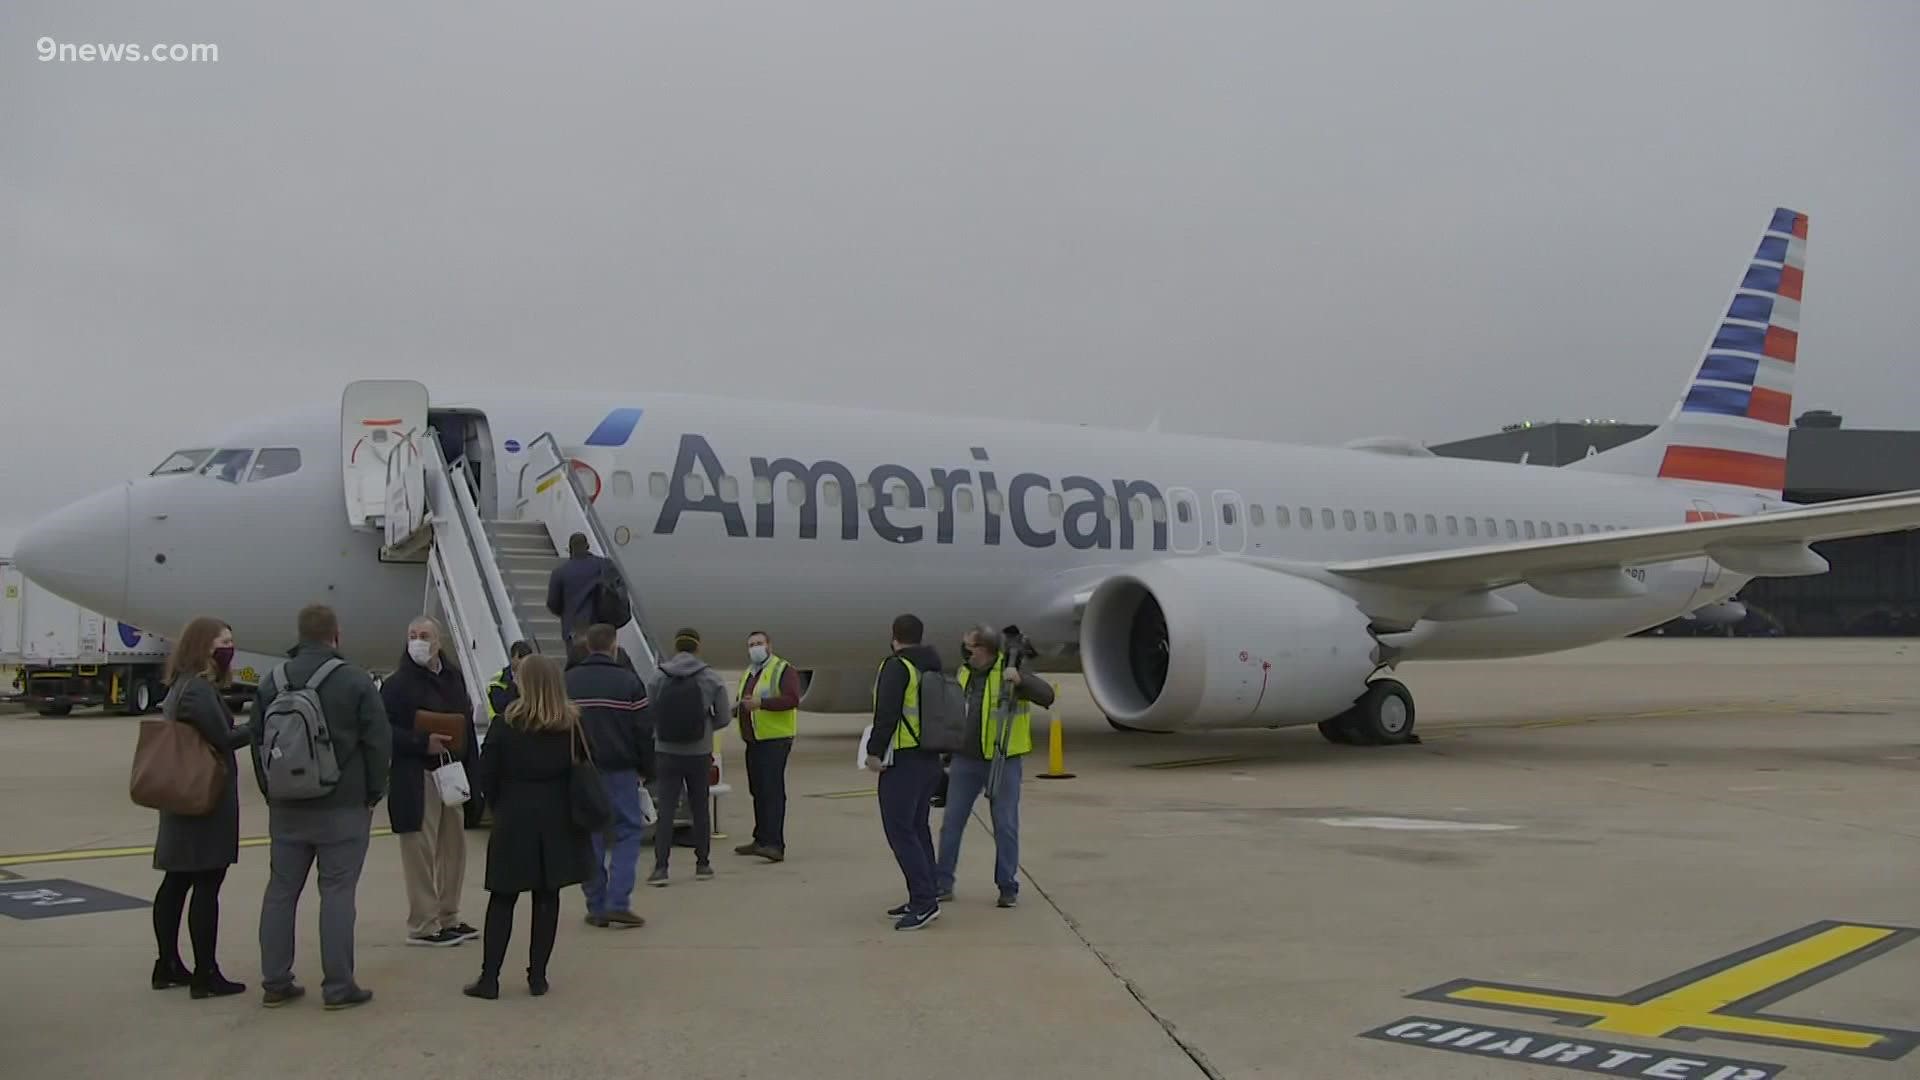 Assaults against crew members are on the rise. Secretary of Transportation Pete Buttigieg said repercussions need to be on the table, including a no-fly list.